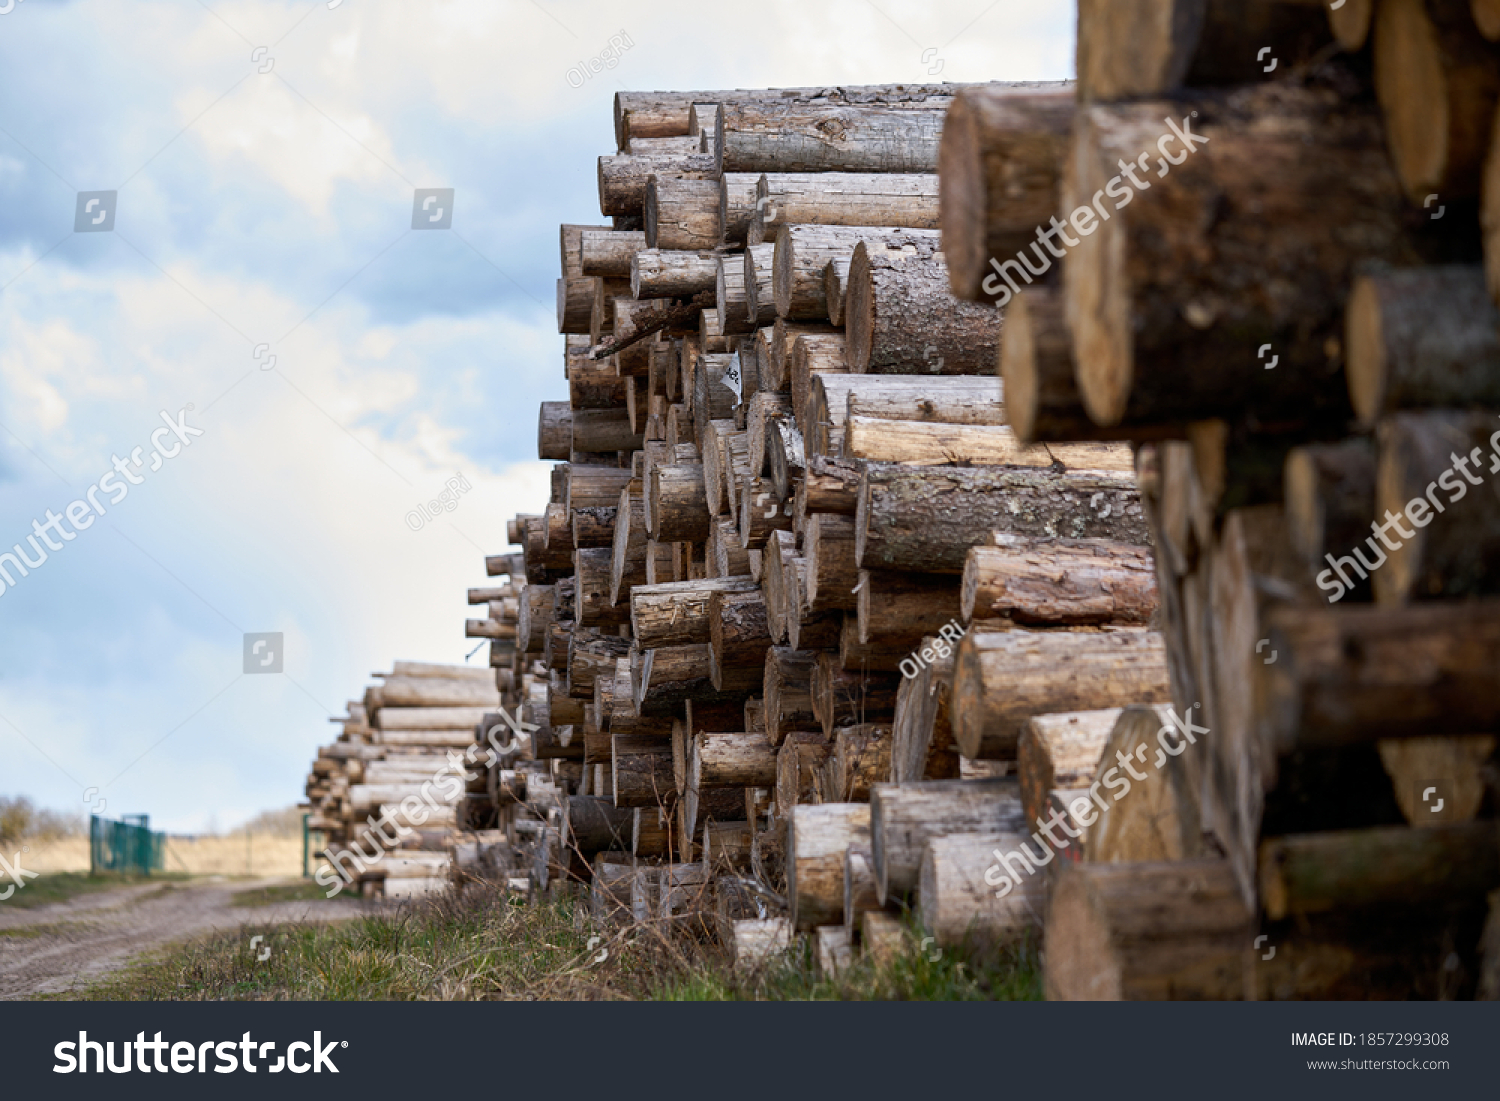 Rows of piled of logs , waiting to be processed, at a local rural lumber mill, made into lumber for construction. #1857299308